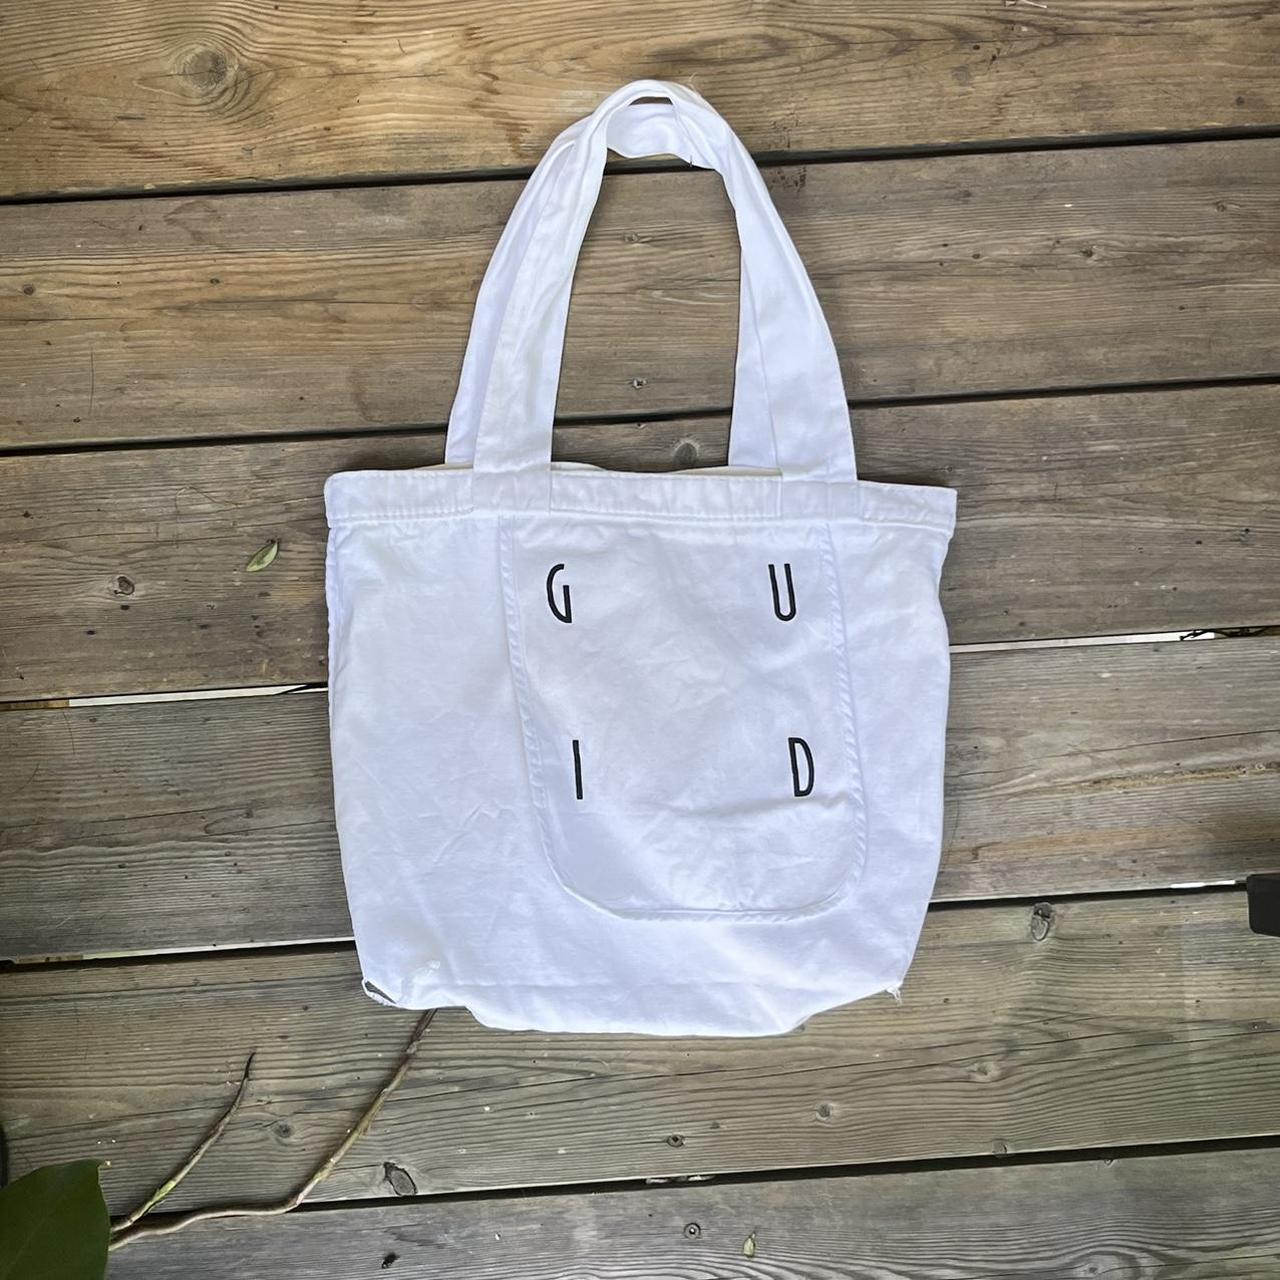 Product Image 1 - vintage guidi small tote bag
FREE